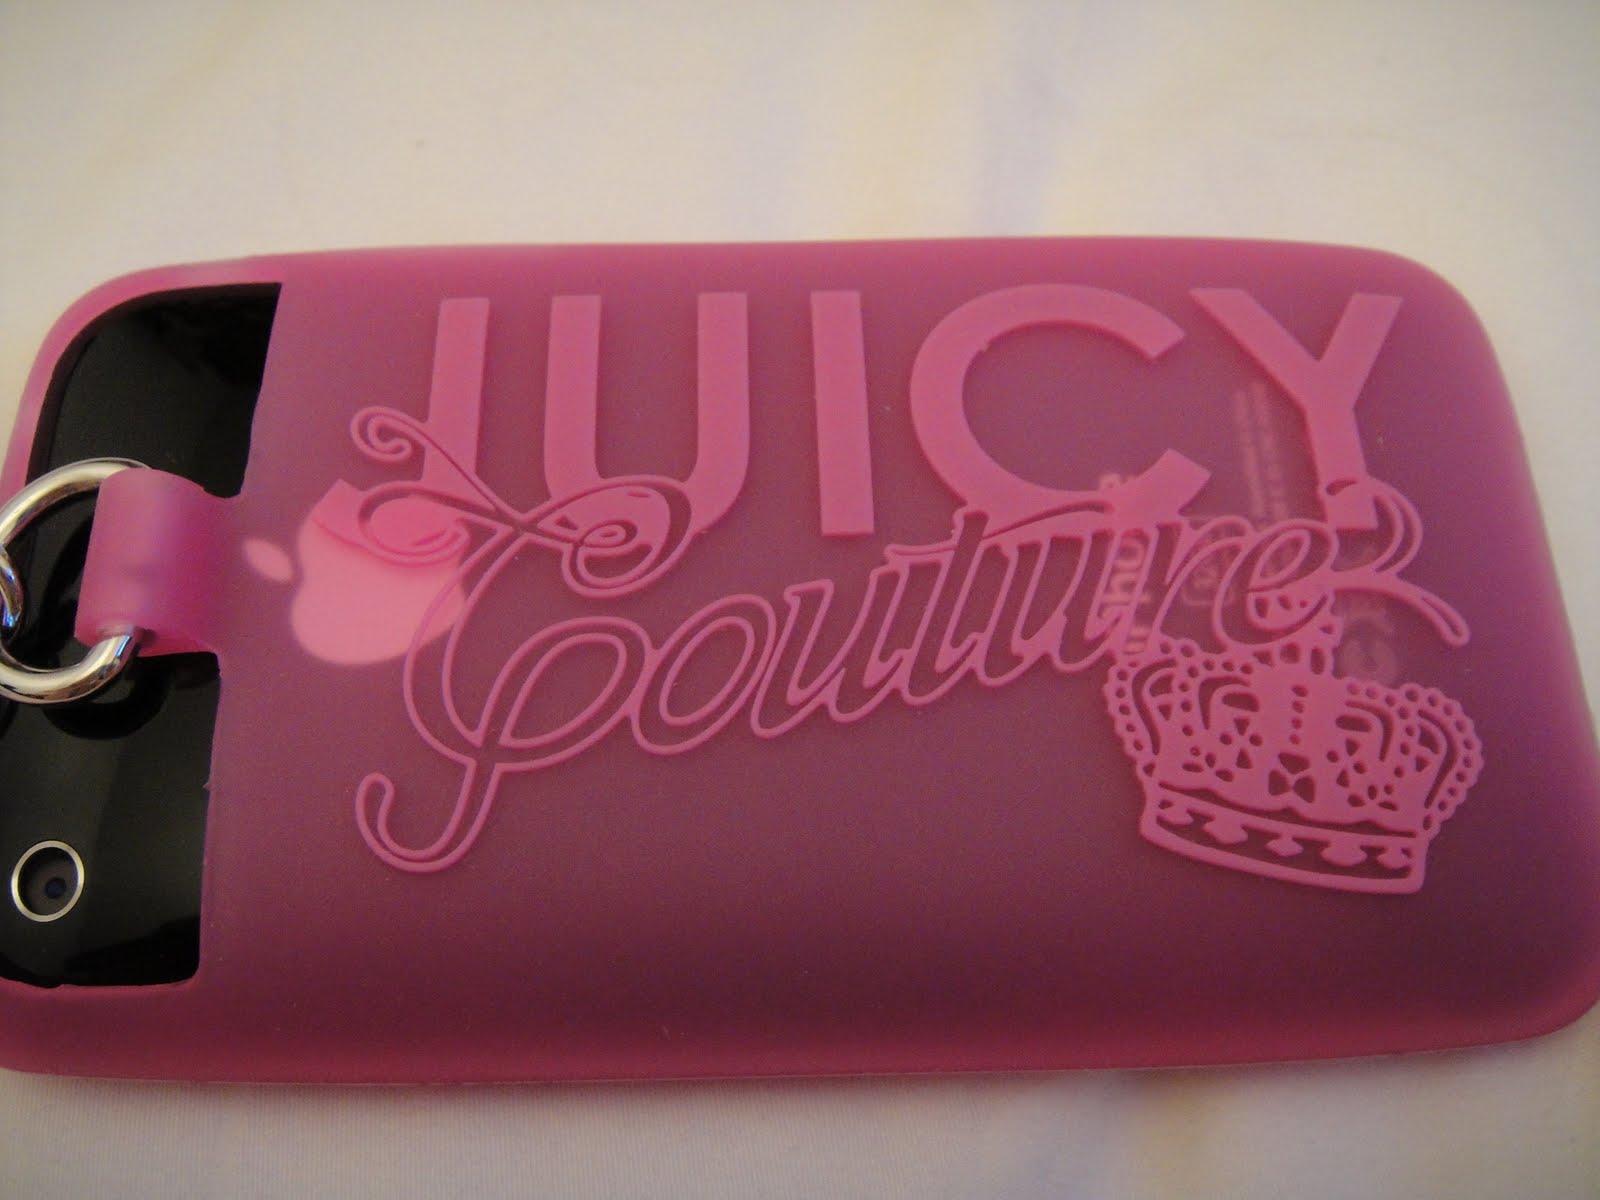 Juicy Couture Free 240x320 Wallpaper download  Download Free Juicy Couture  HD 240x320 Wallpapers to your mobile phone or tablet